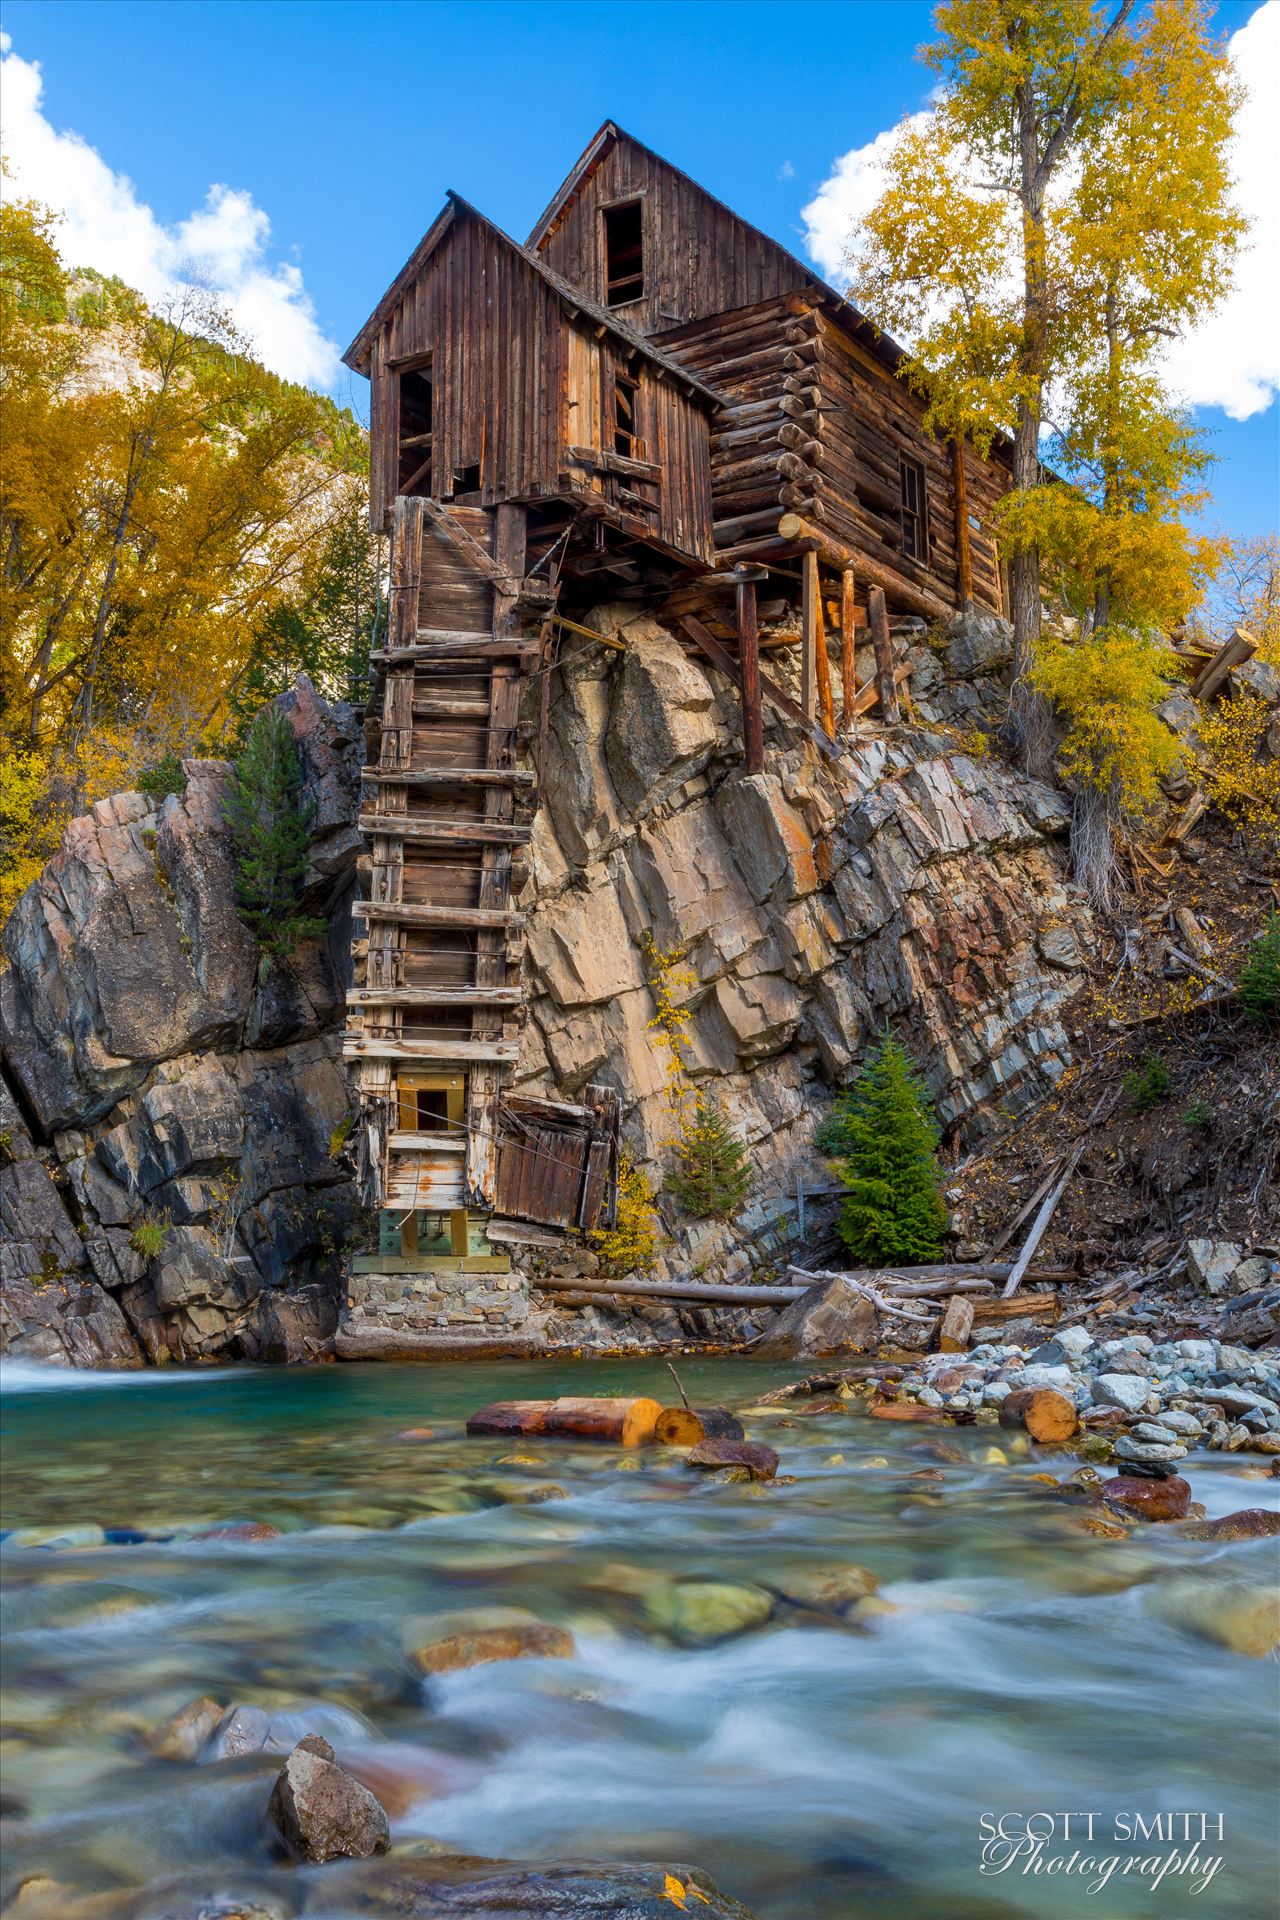 Crystal Mill, Colorado 09 - The Crystal Mill, or the Old Mill is an 1892 wooden powerhouse located on an outcrop above the Crystal River in Crystal, Colorado by Scott Smith Photos